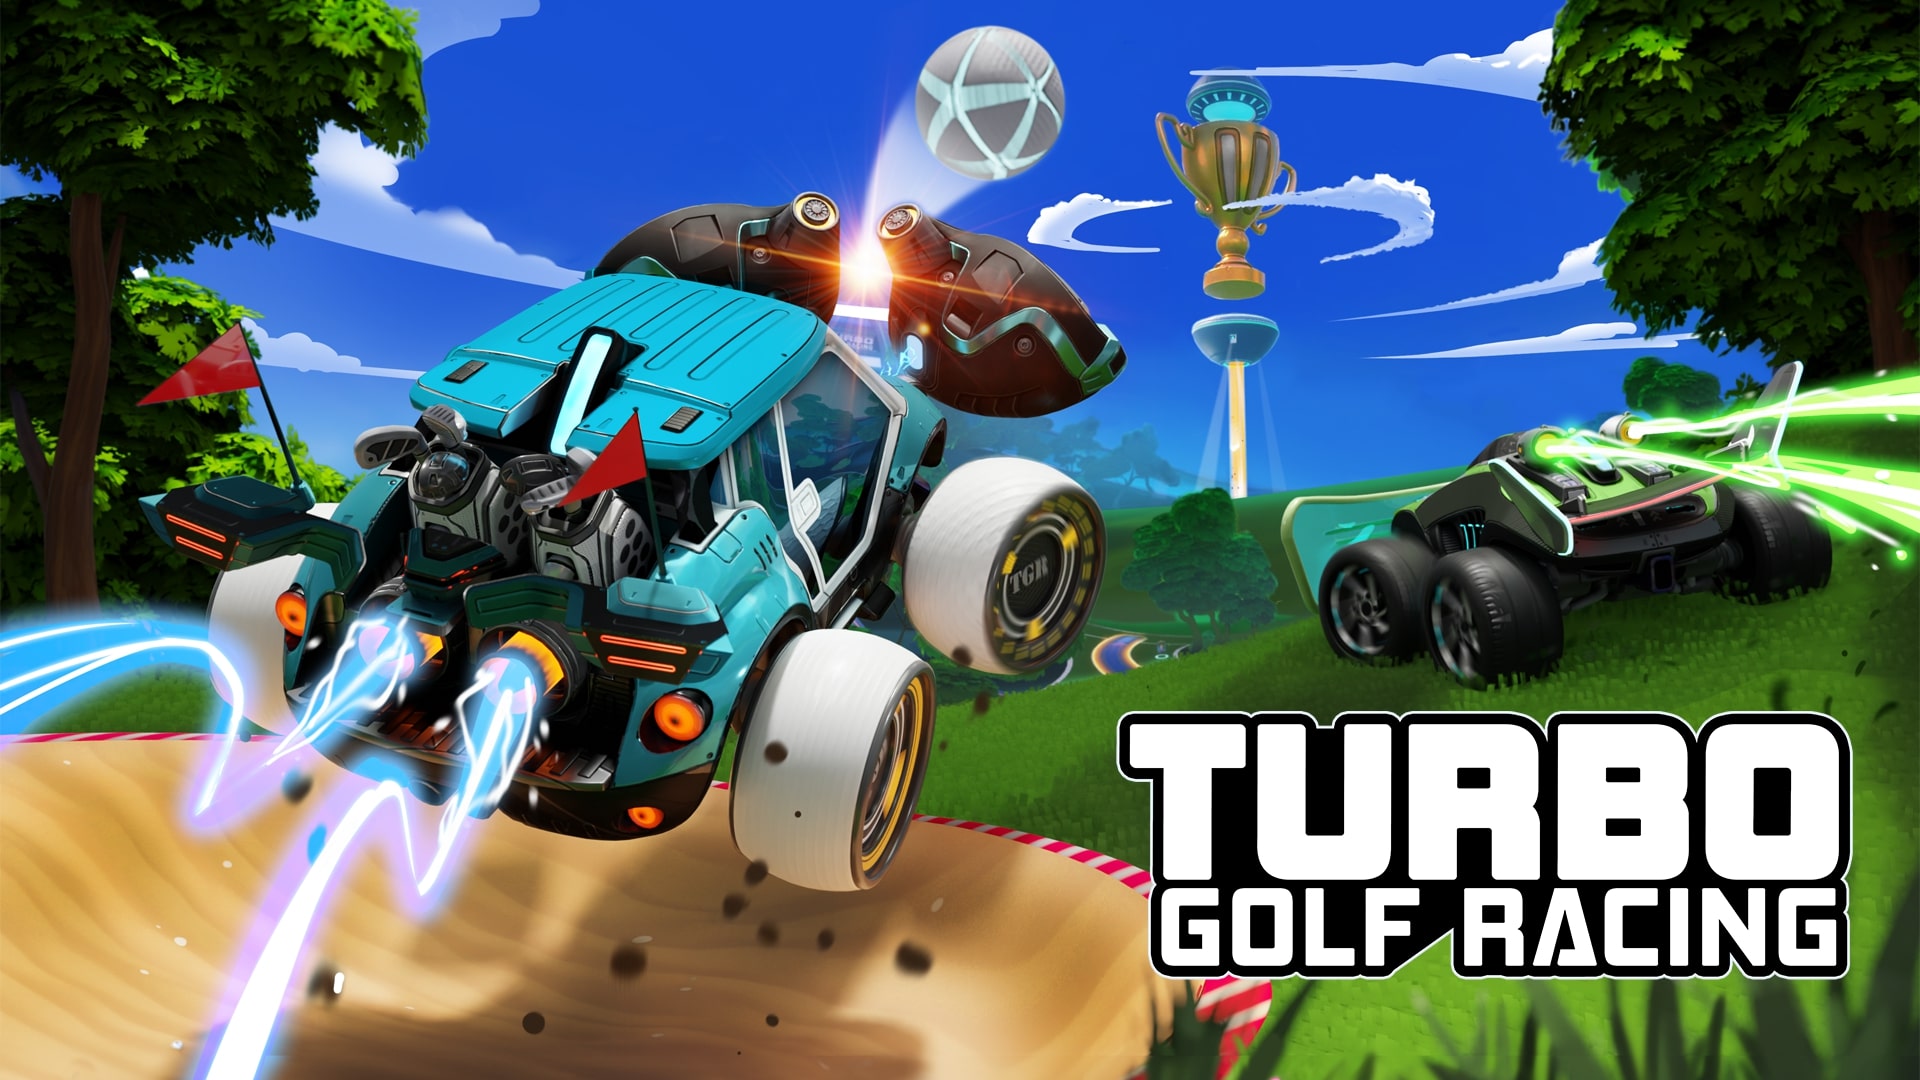 Turbo Golf Racing: From 1 Million Game Preview Players to Release